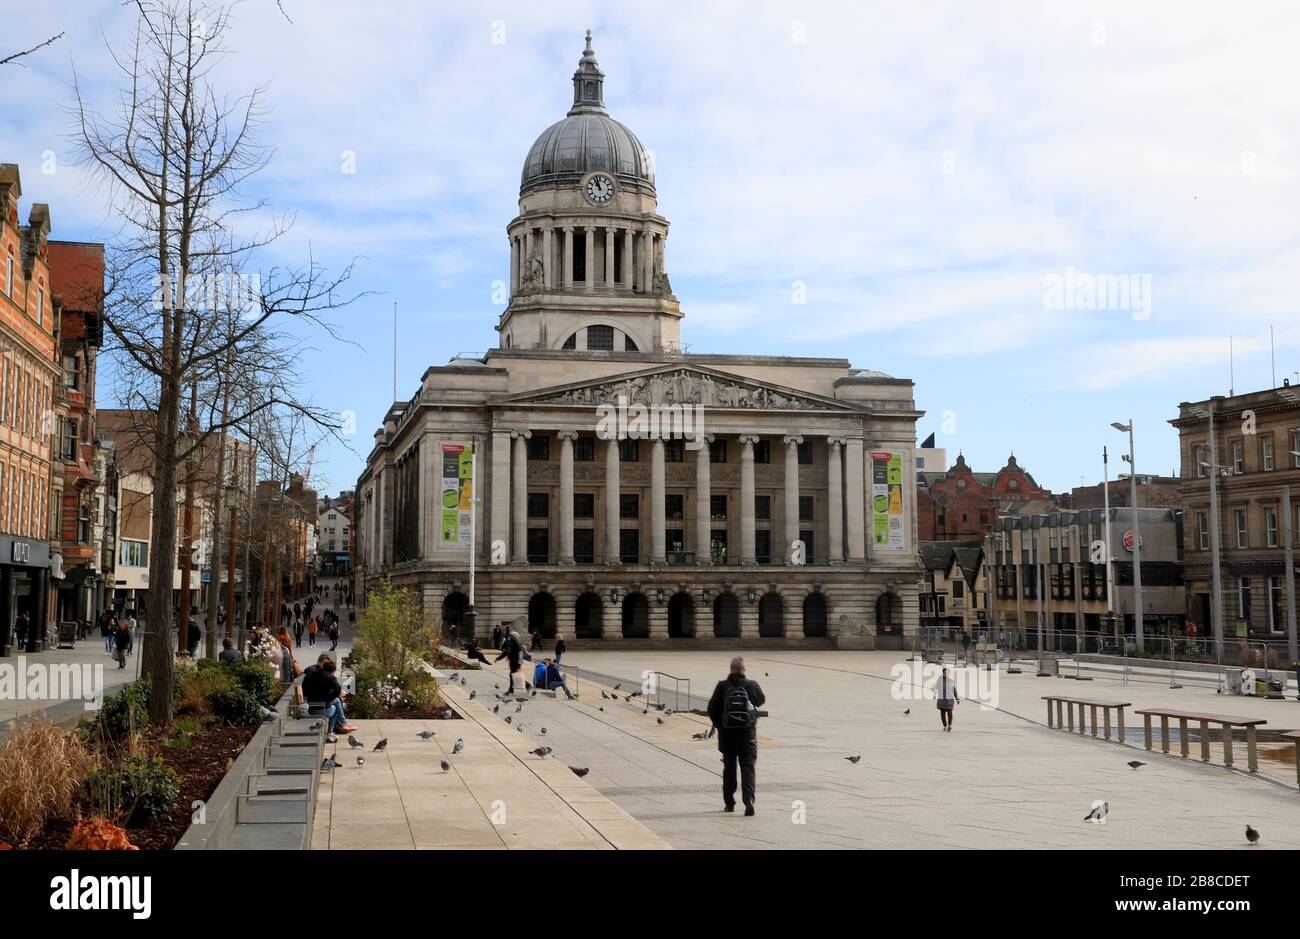 A general view of the empty Market Square in Nottingham. Stock Photo